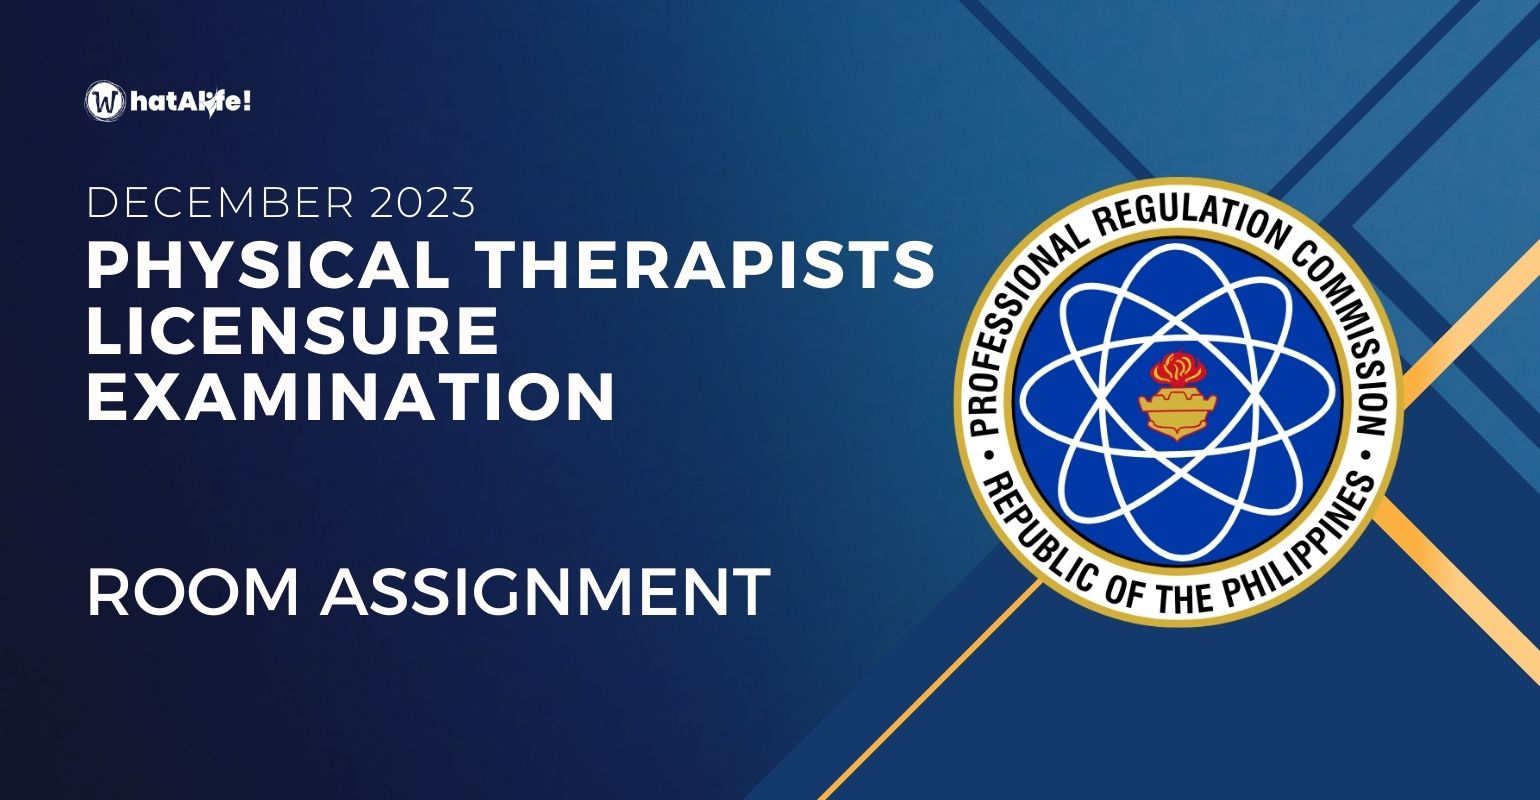 room assignment december 2023 physical therapists licensure exam